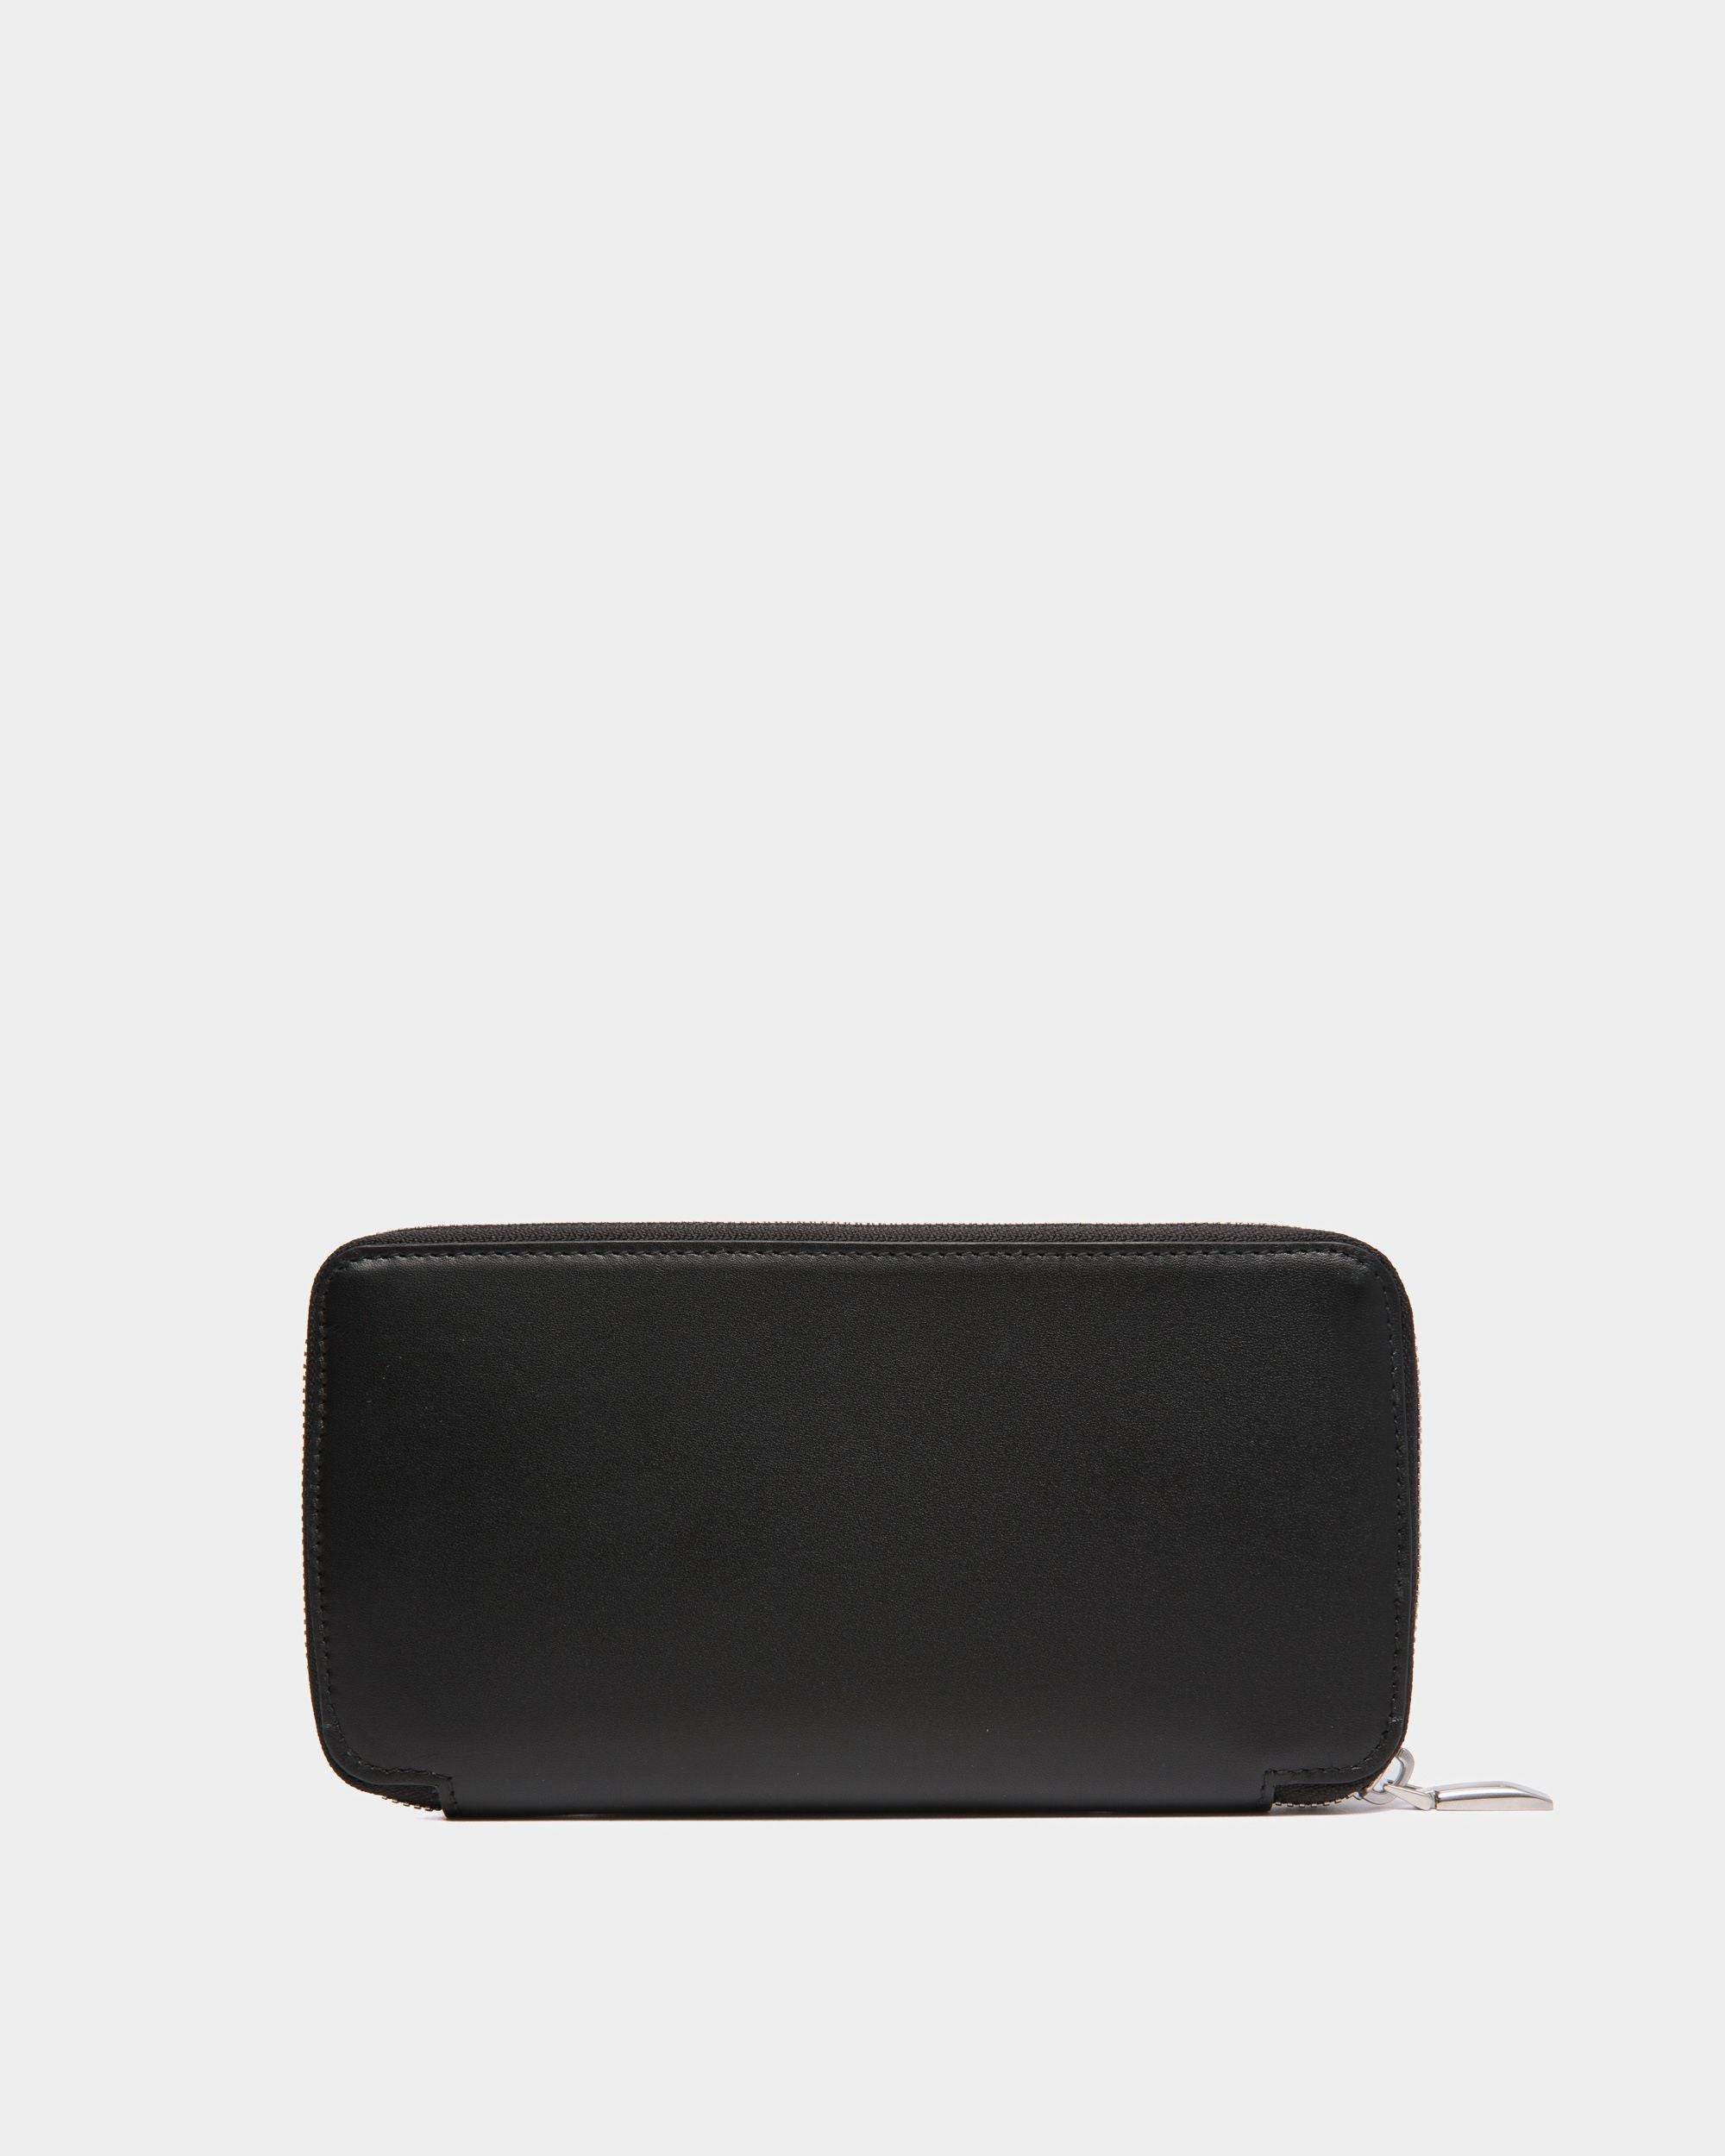 Busy Bally | Men's Zip Around Wallet in Black Leather | Bally | Still Life Back